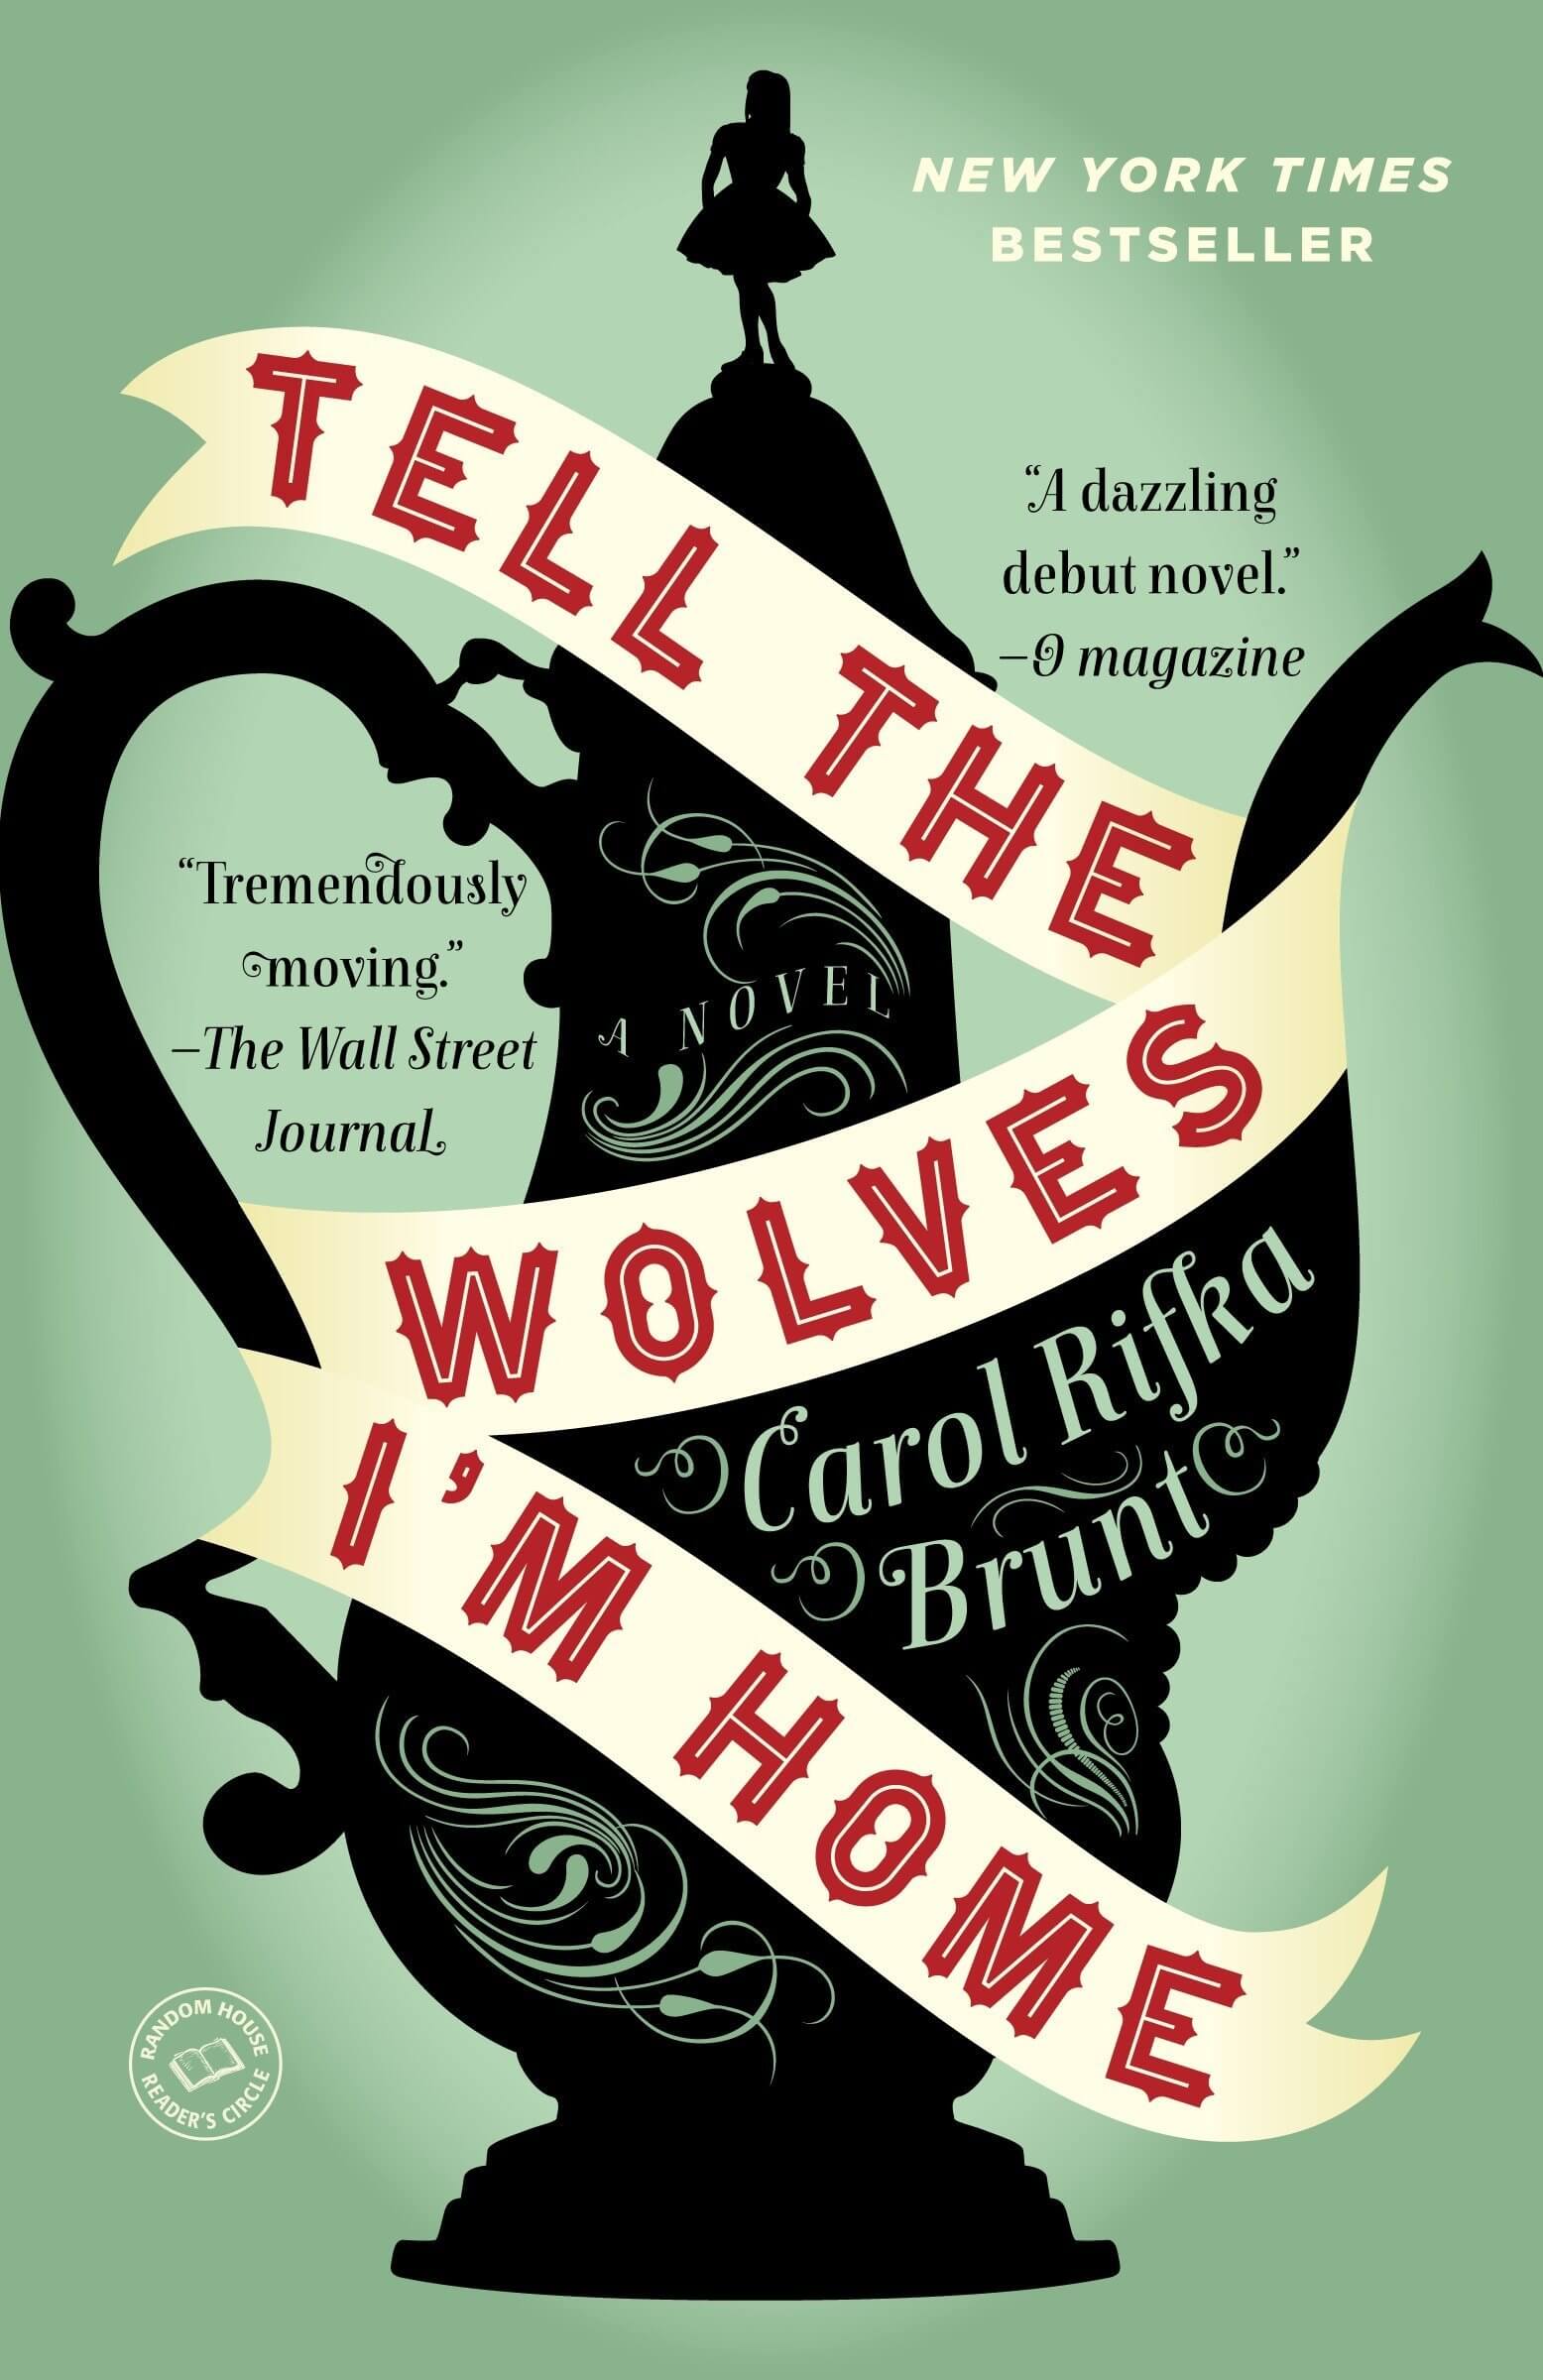 Cover of Tell the Wolves I'm Home by Carol Rifka Brunt